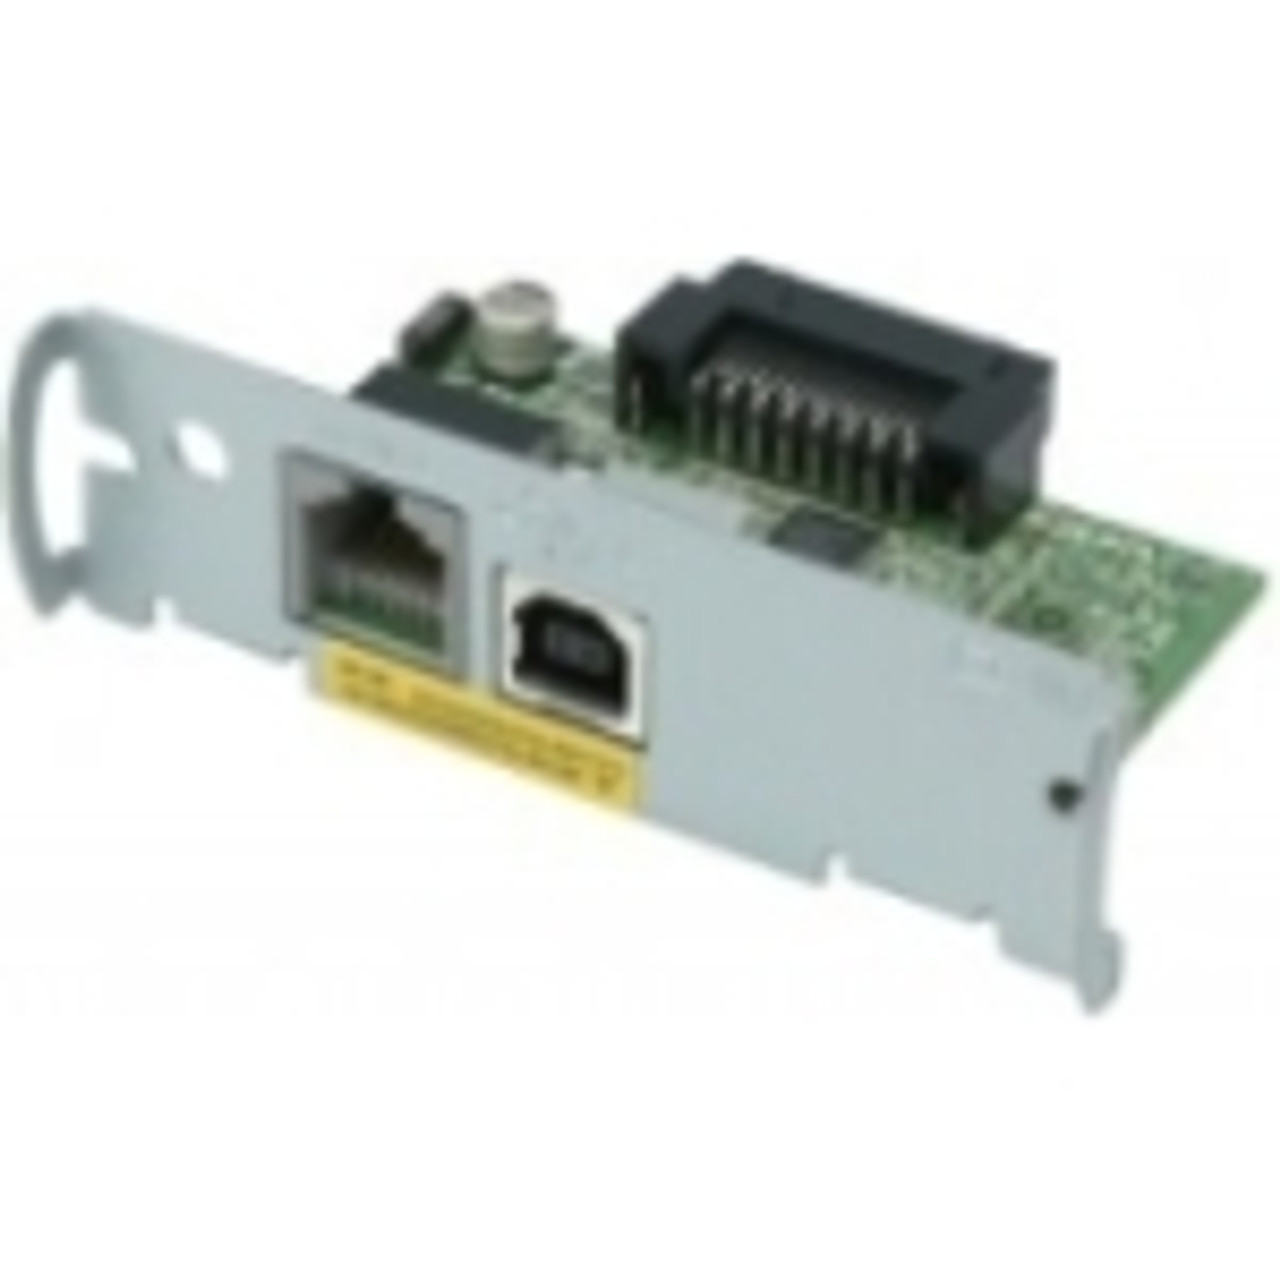 C32C824121 Epson USB Interface Card with DMD Port and Without HUB